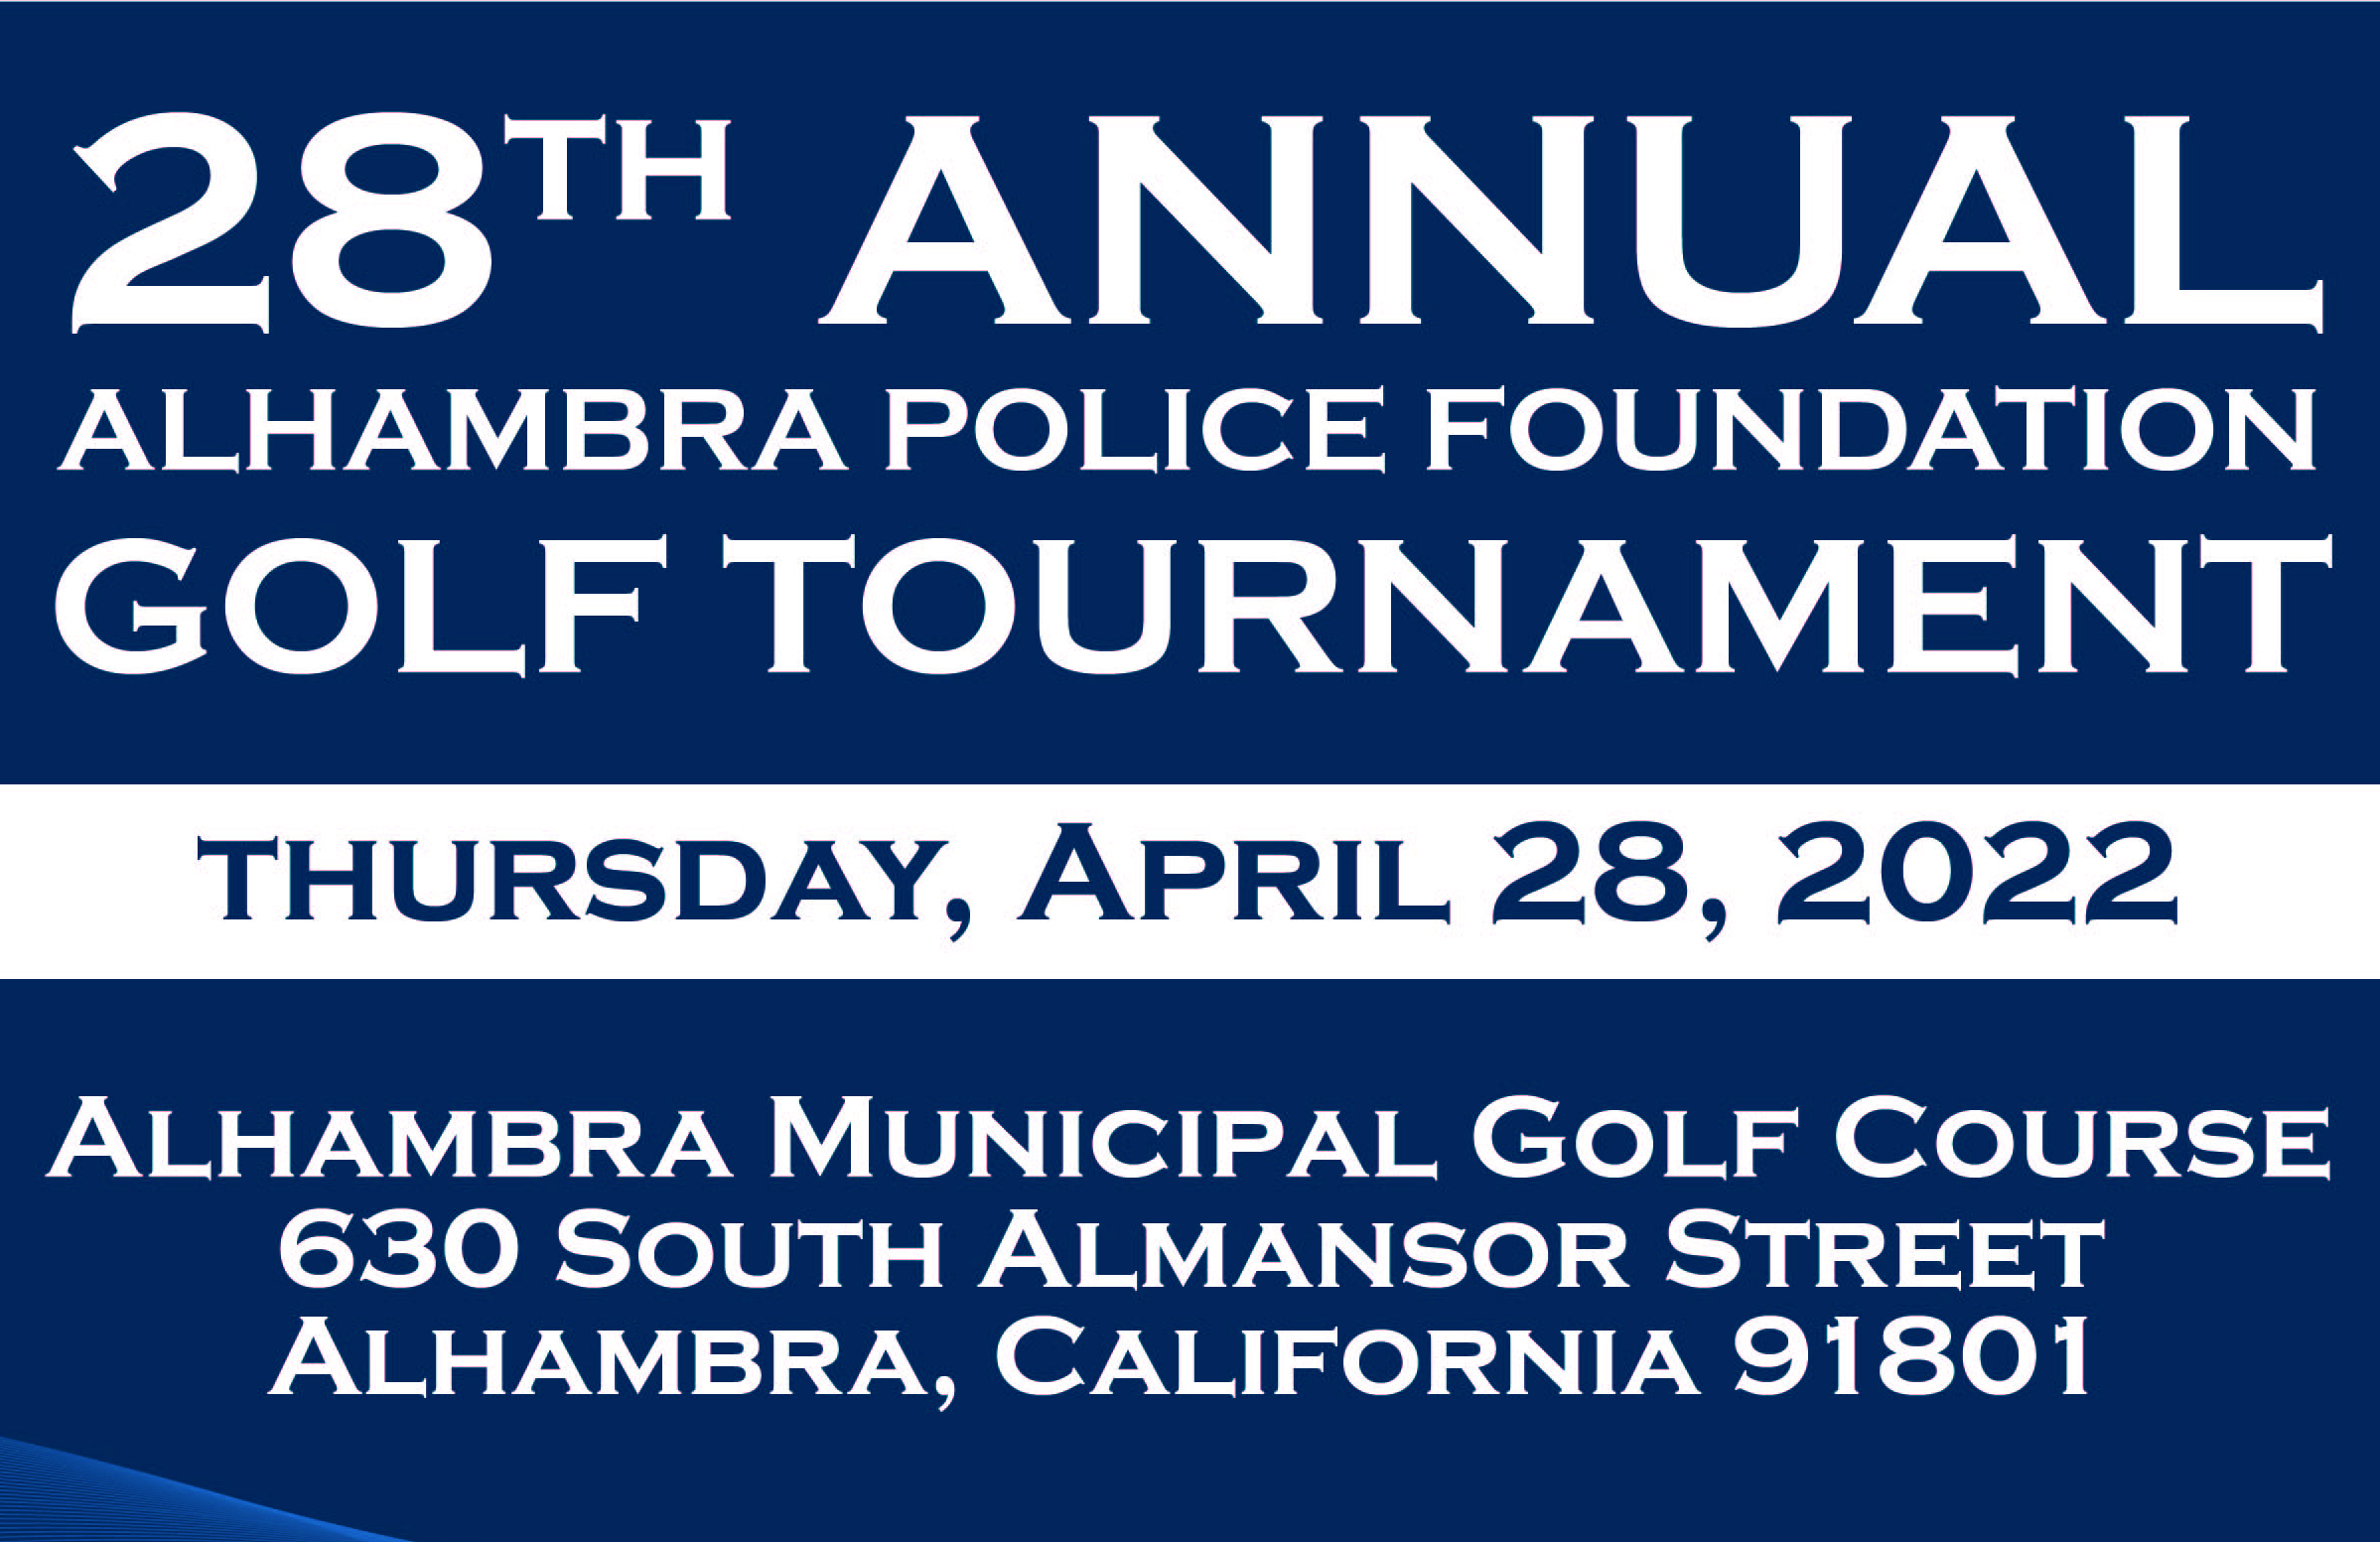 28TH ANNUAL ALHAMBRA POLICE FOUNDATION GOLF TOURNAMENT